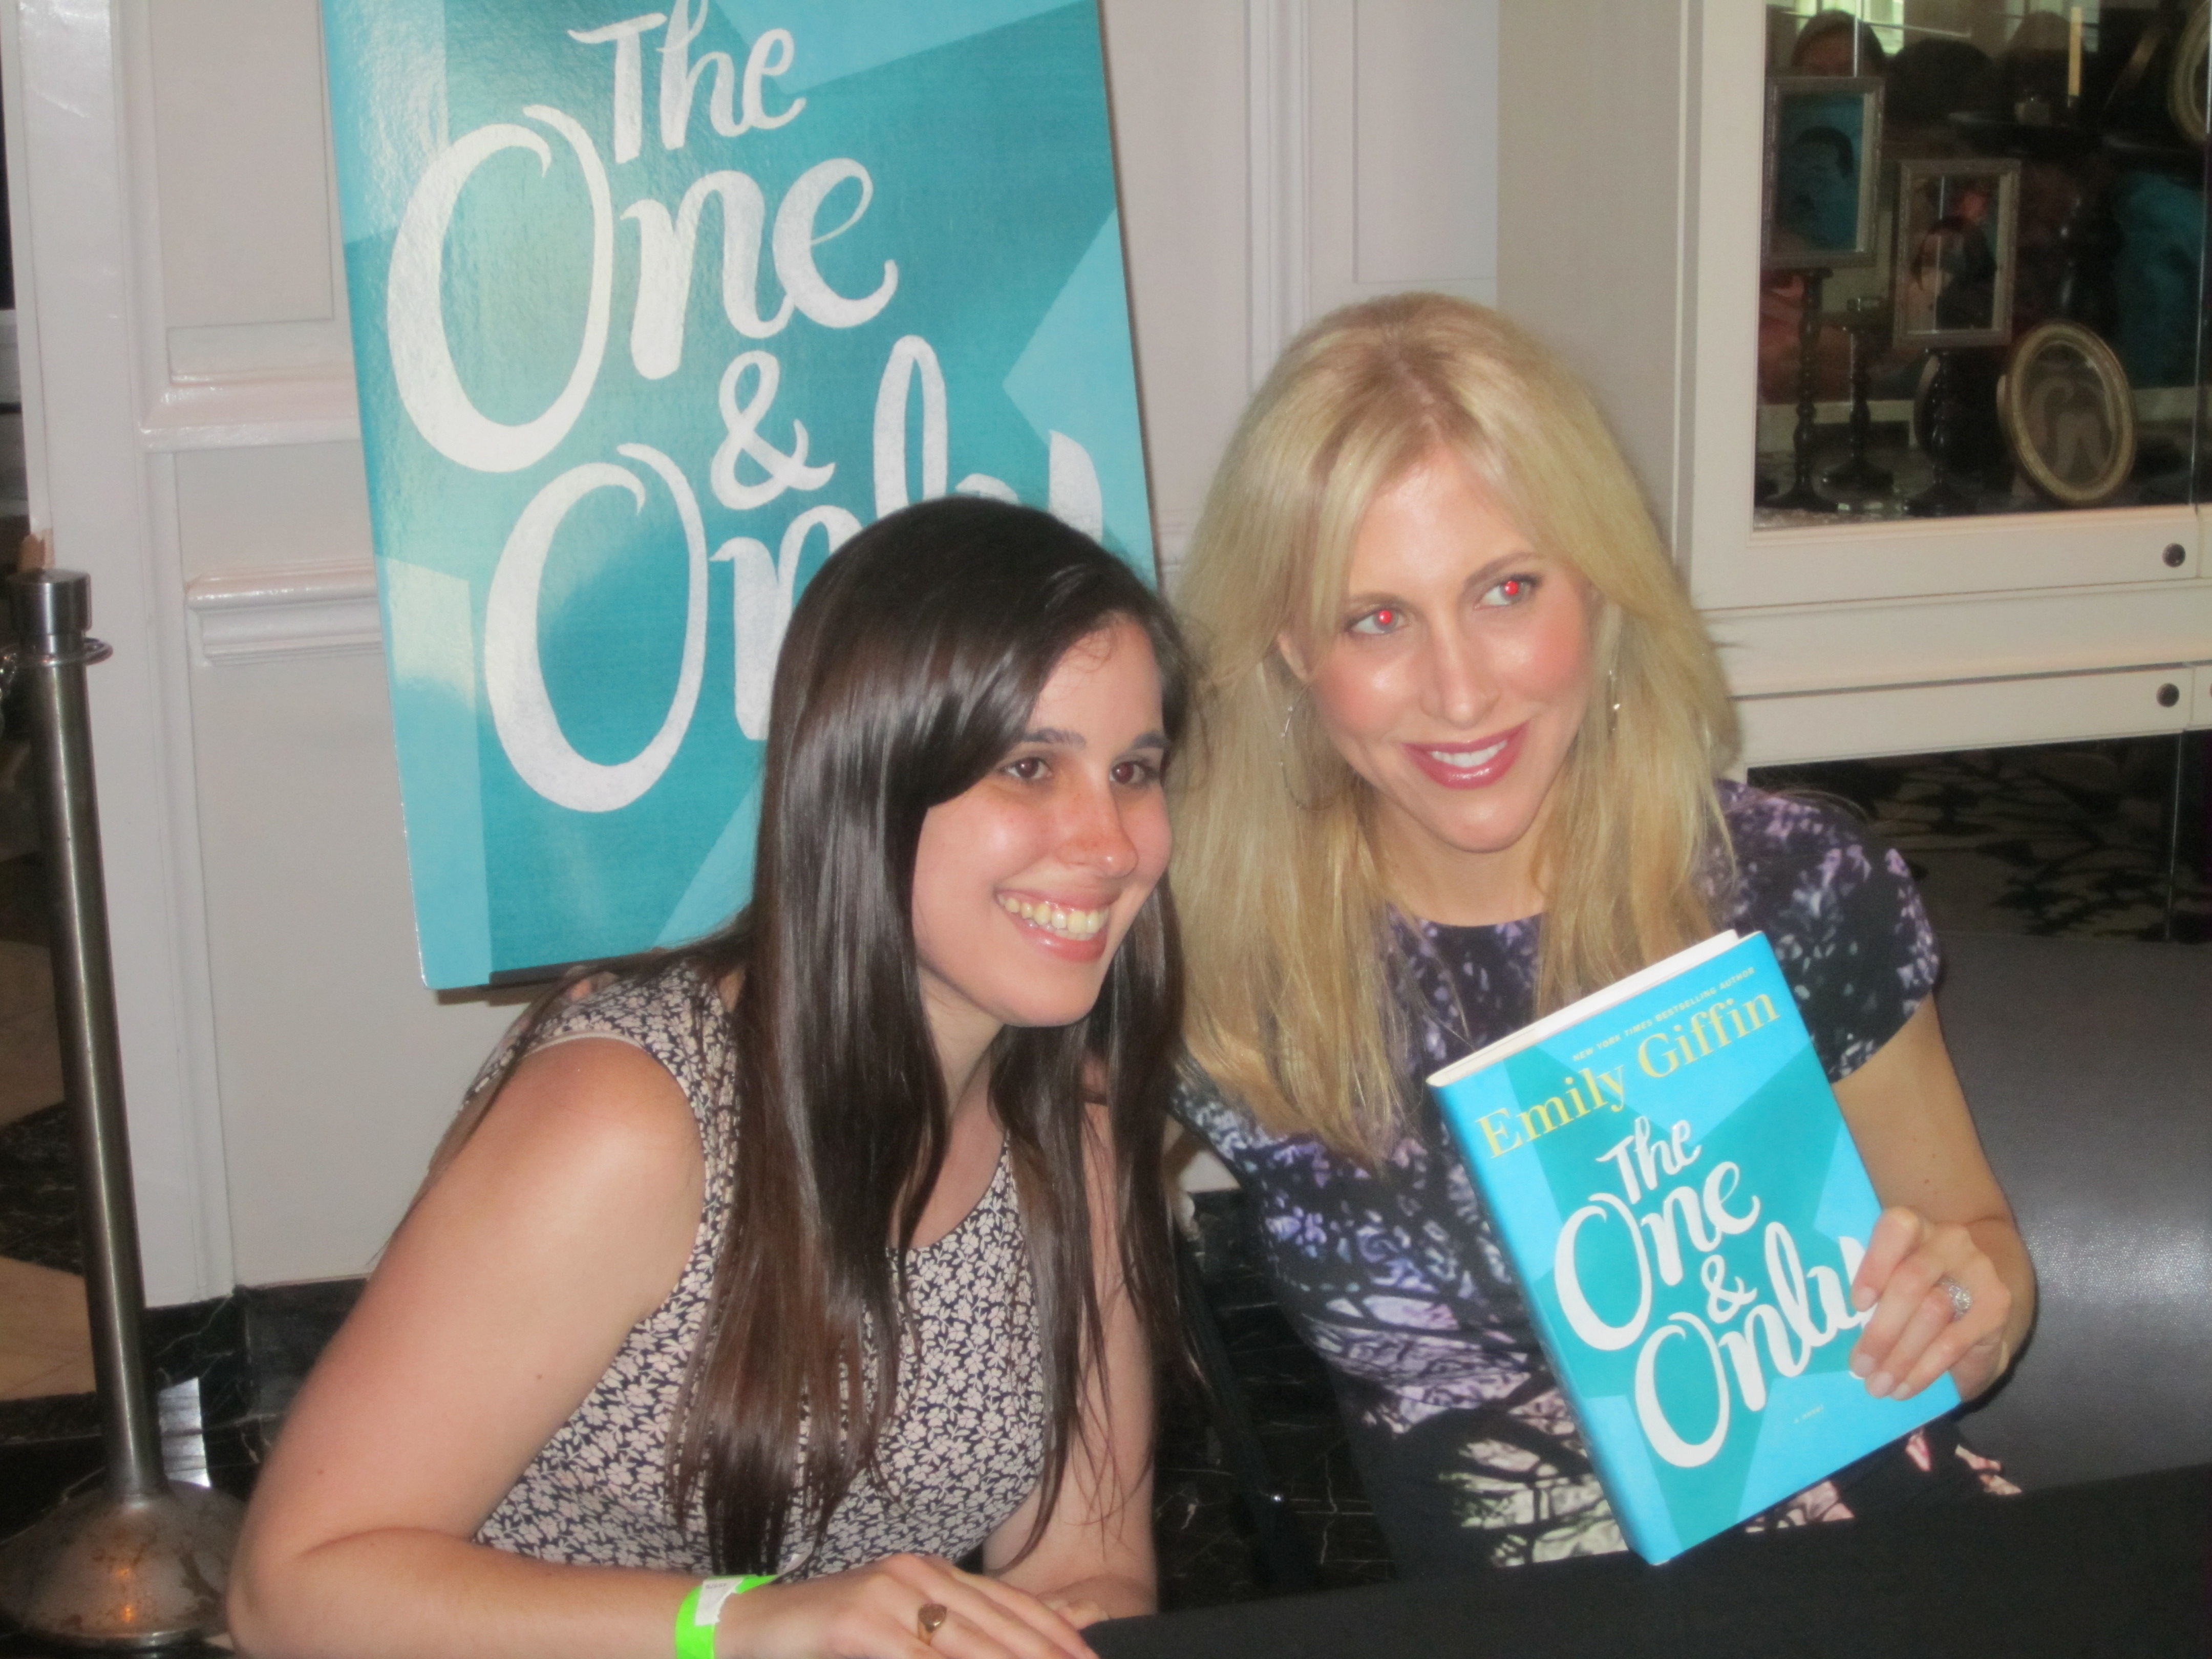 Emily Giffin Signs “The One & Only” at W Hotel